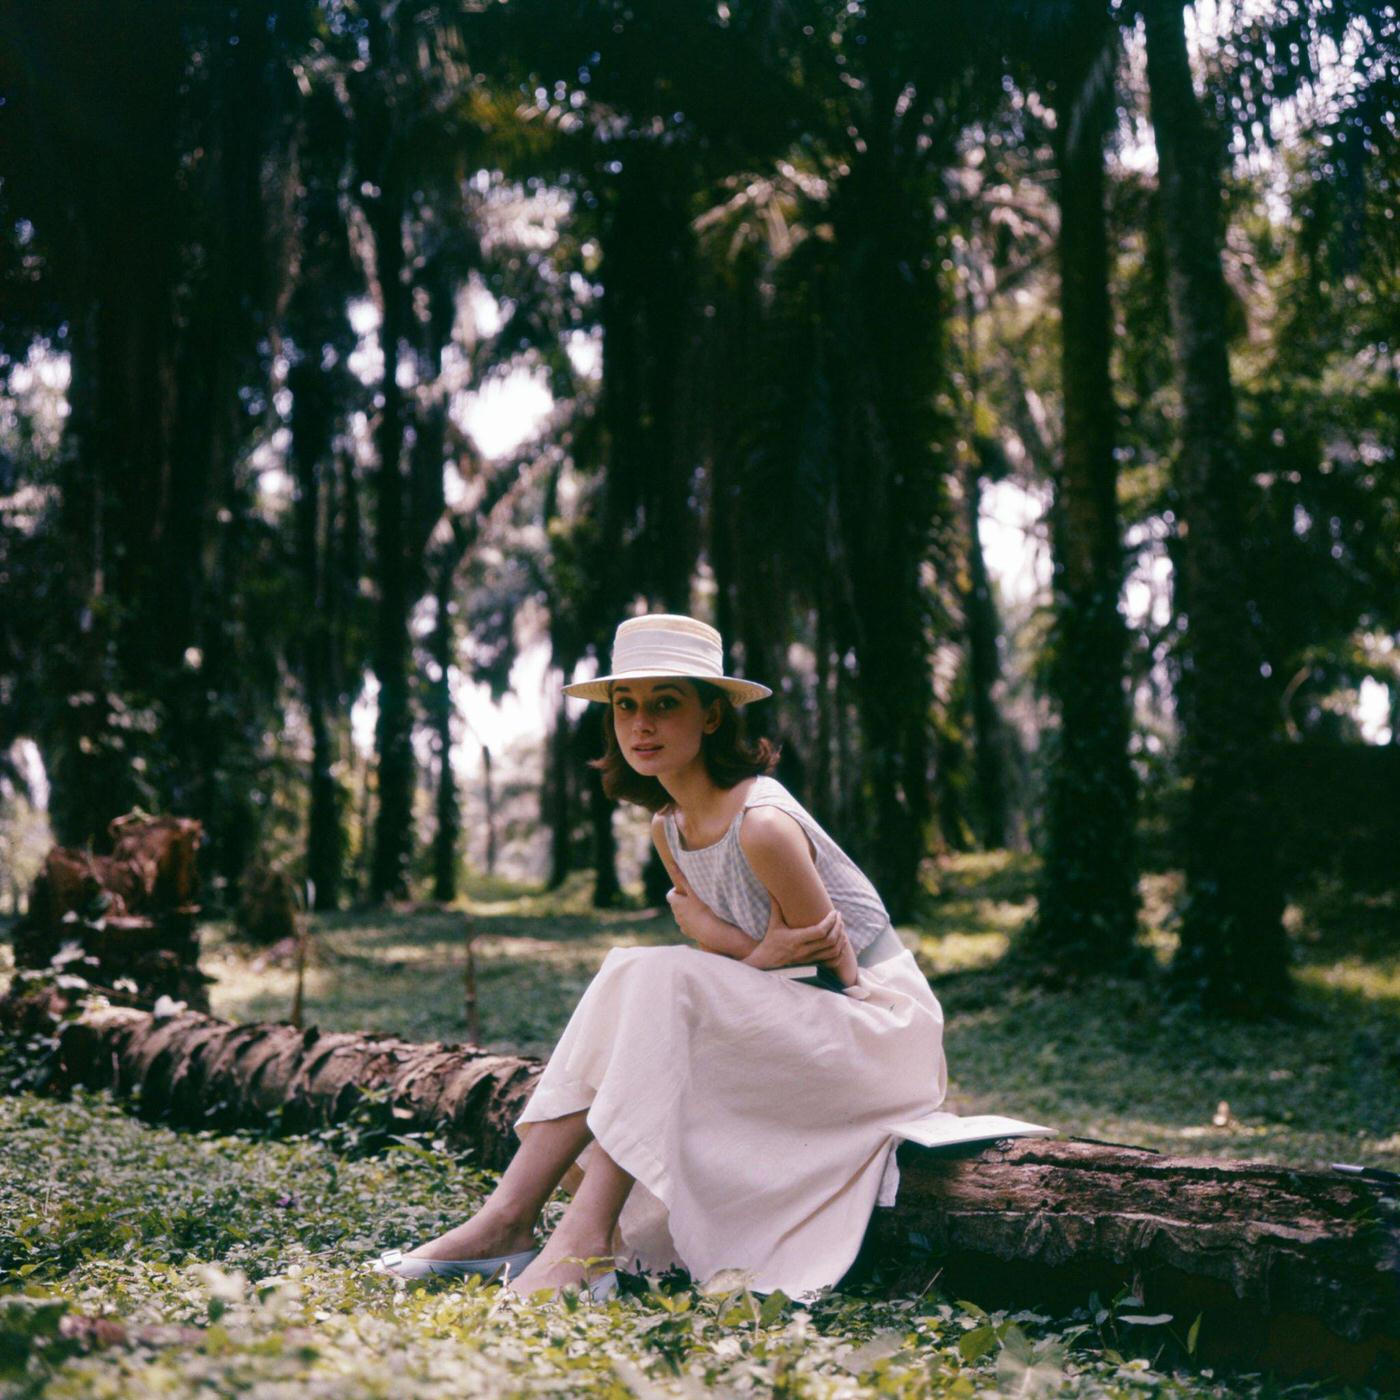 Audrey Hepburn with a white hat and dress sits on a tree while walking in the Congo forest, 1958.